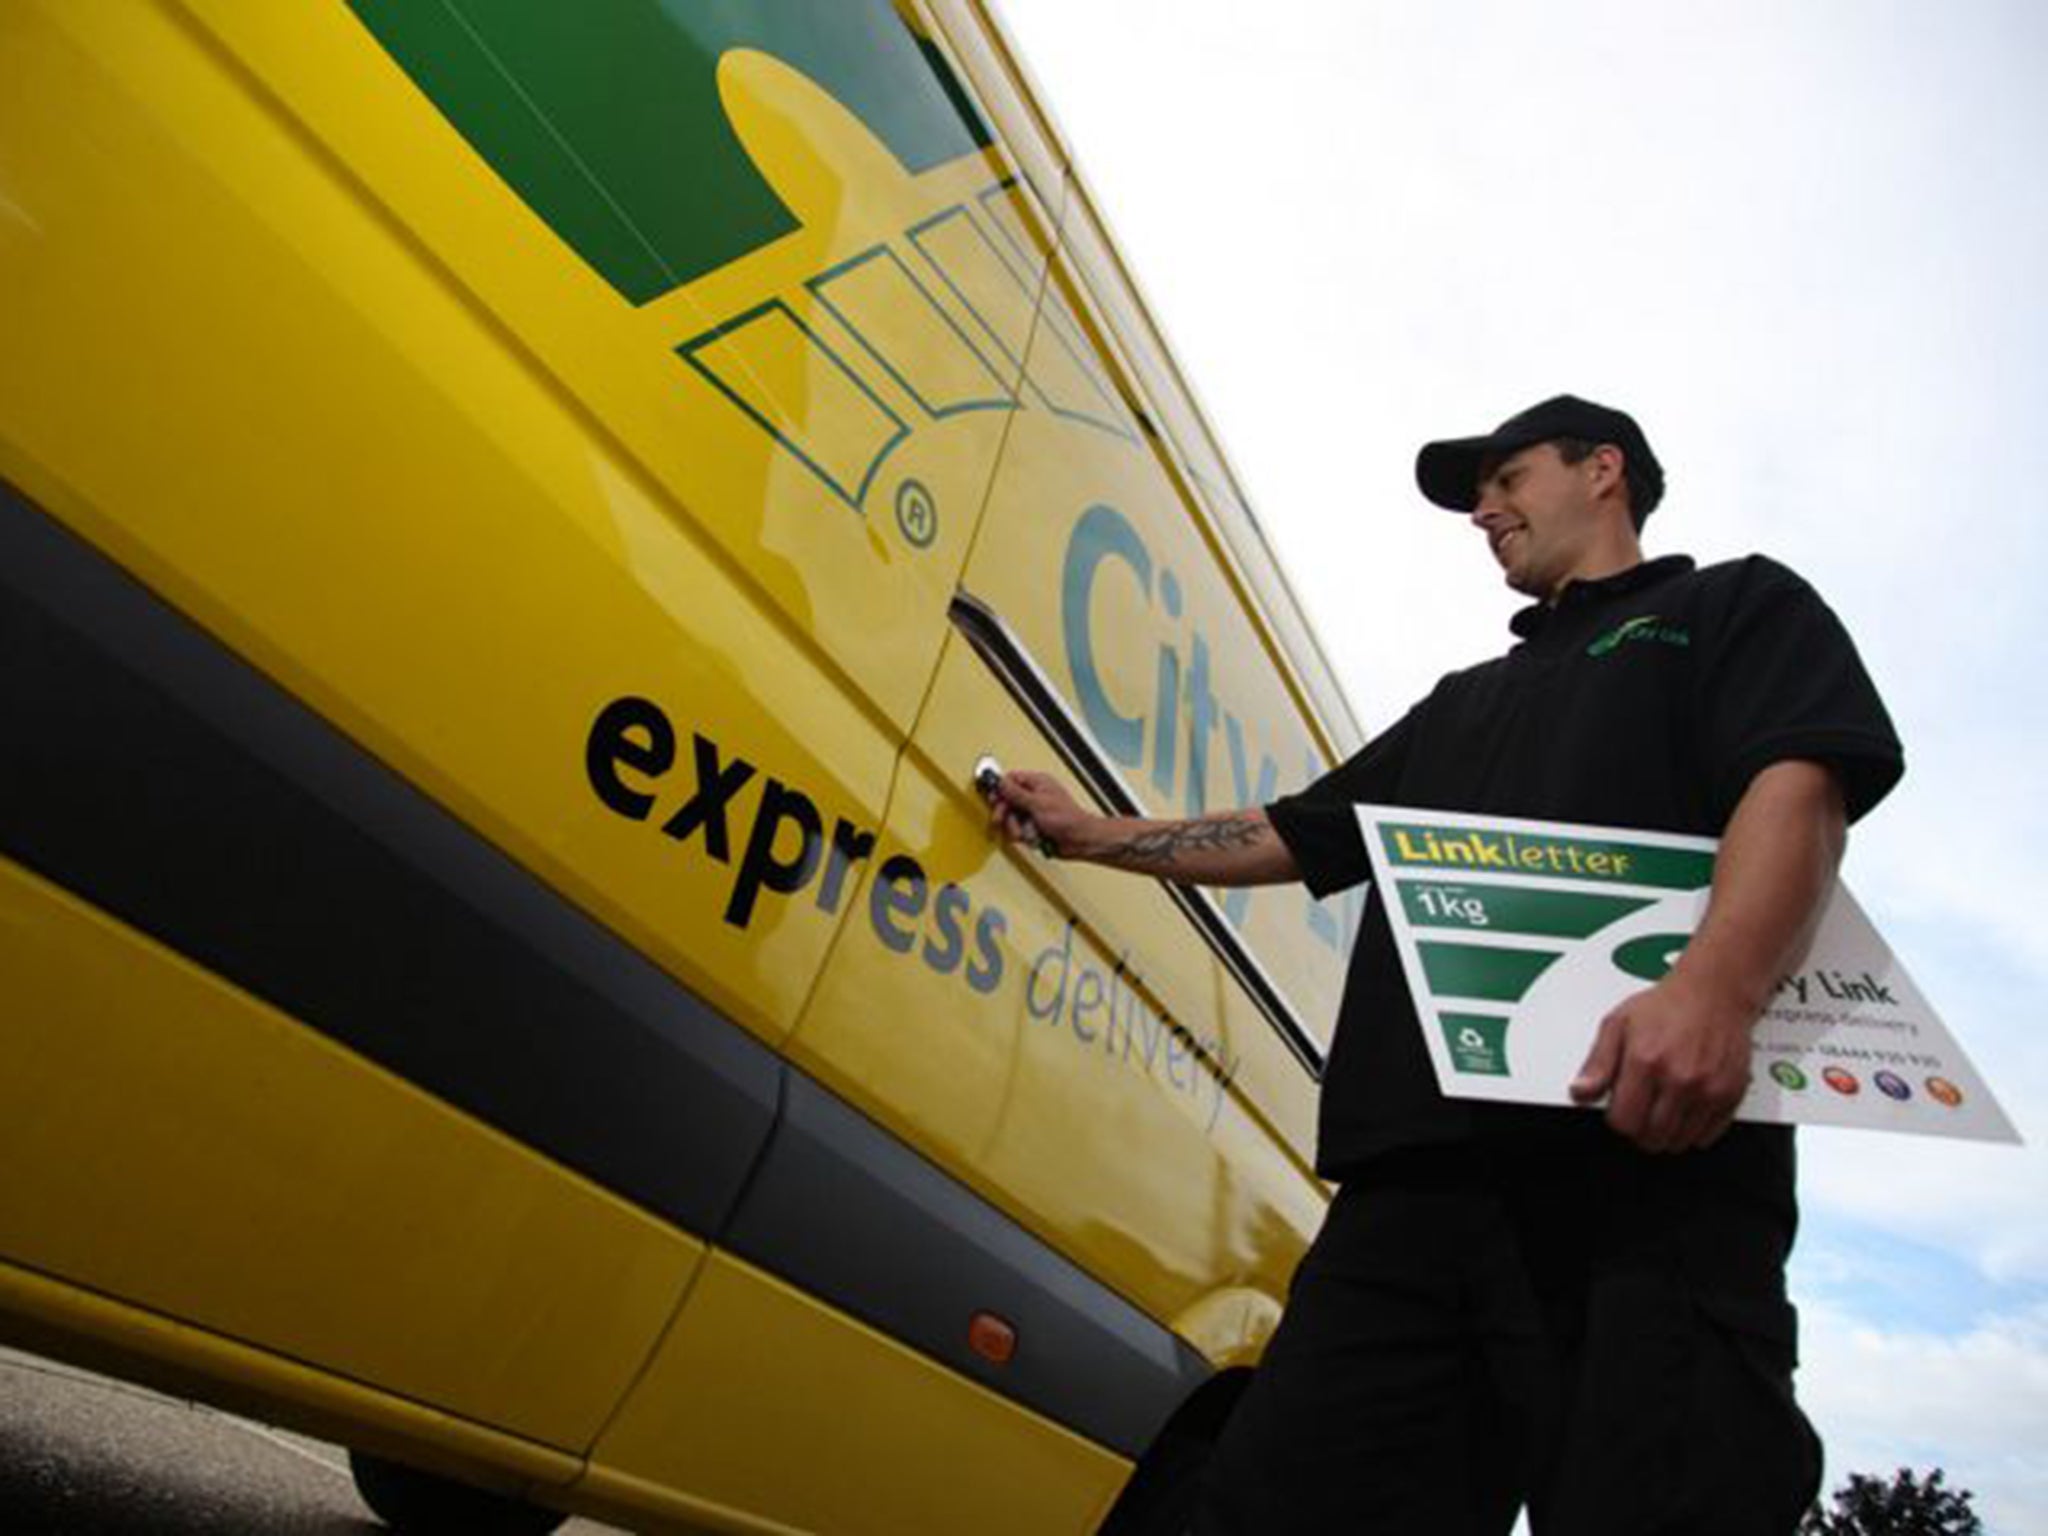 Parcel delivery company City Link employs 2,727 workers